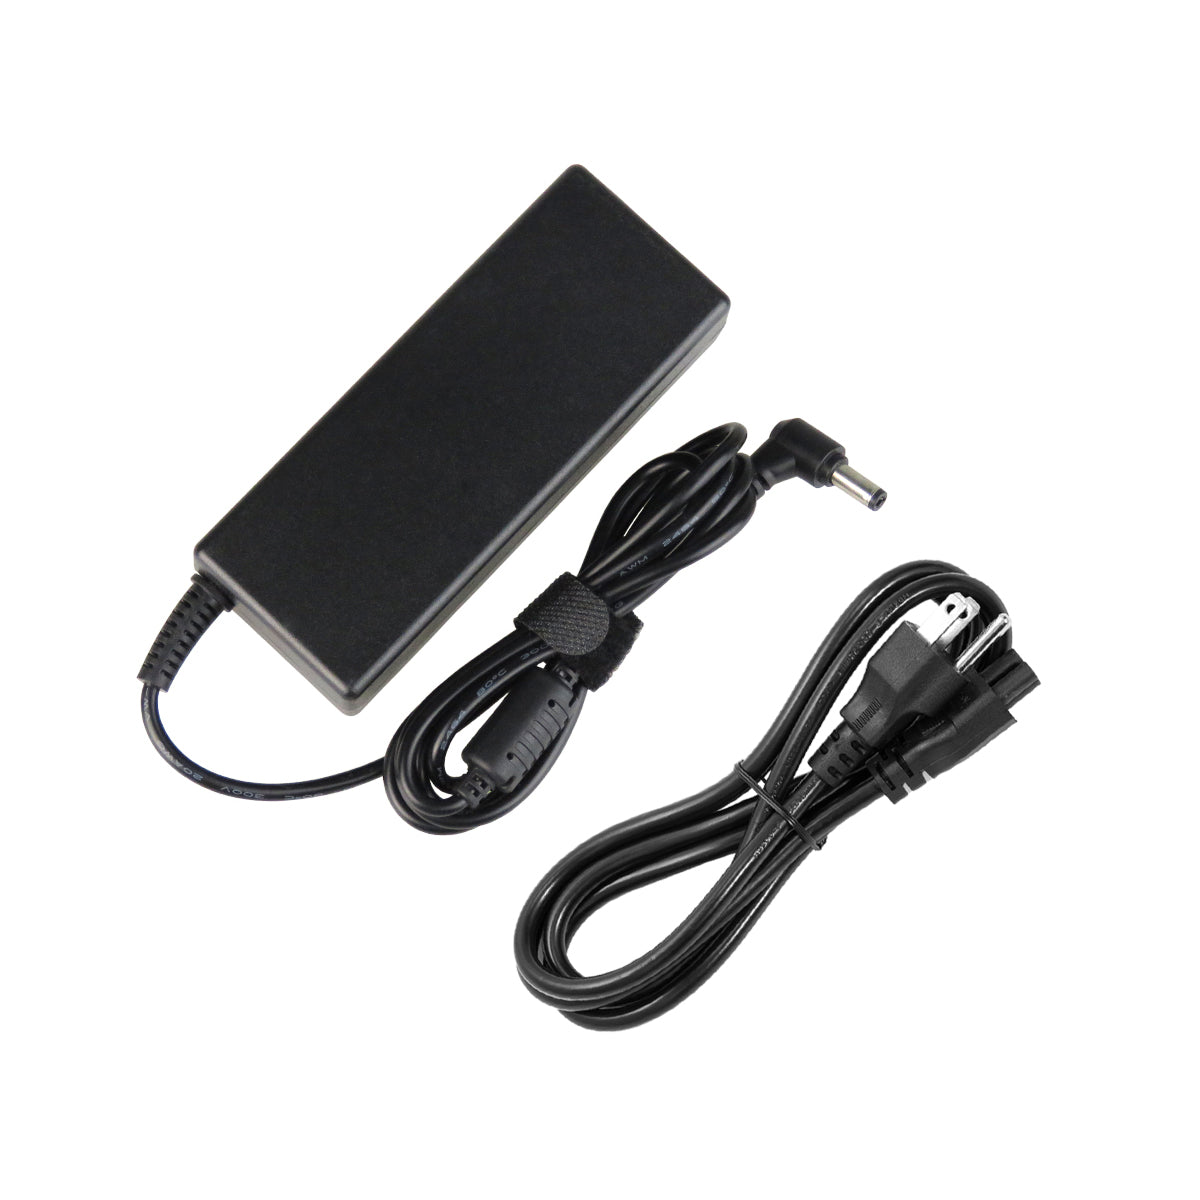 AC Adapter Charger for ASUS K45VD Notebook.